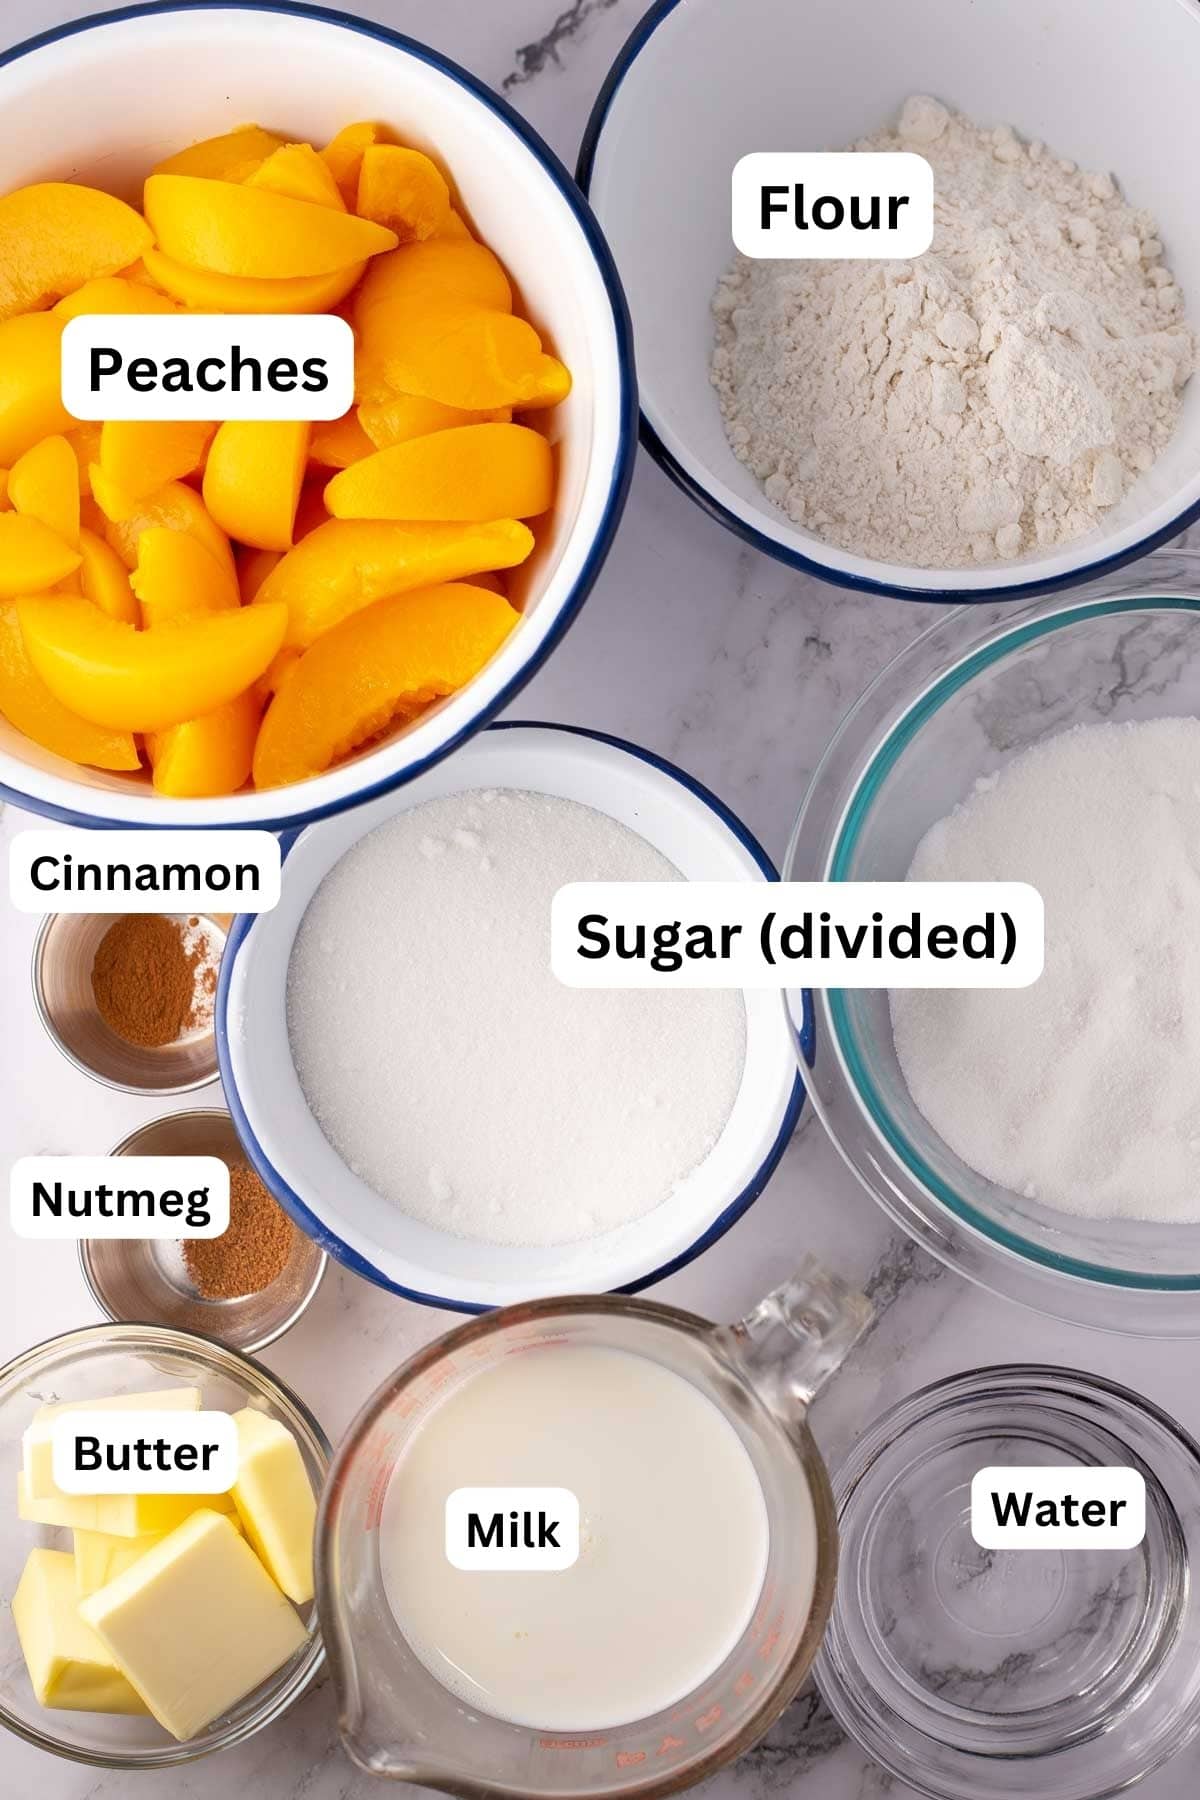 Paula Deen's Southern peach cobbler recipe ingredients measured out and labeled.